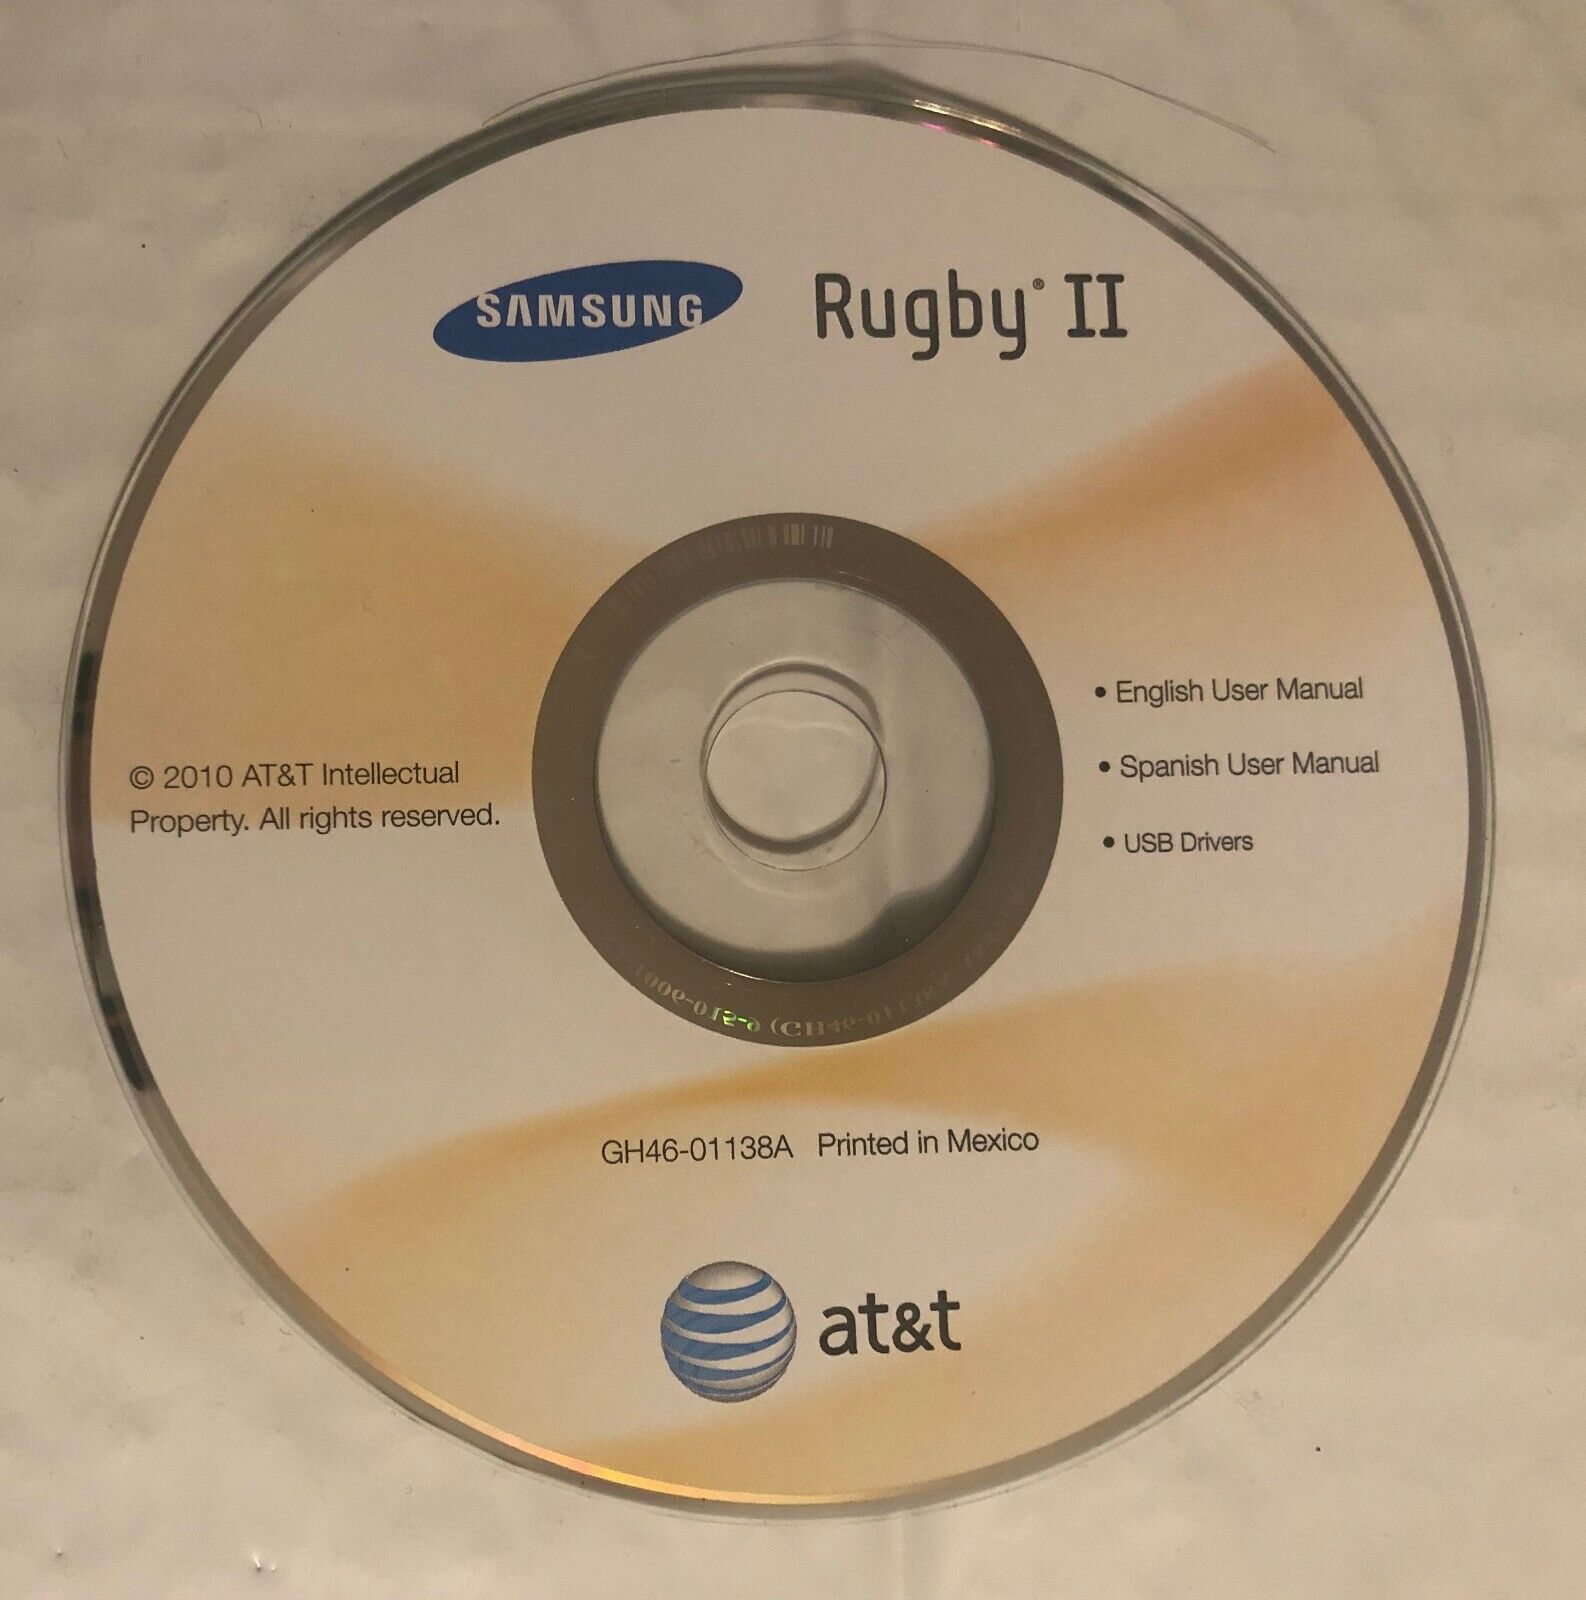 RARE Samsung Rugby II AT&T English Manual USB Driver CD- Scratch Free Disc #XD11